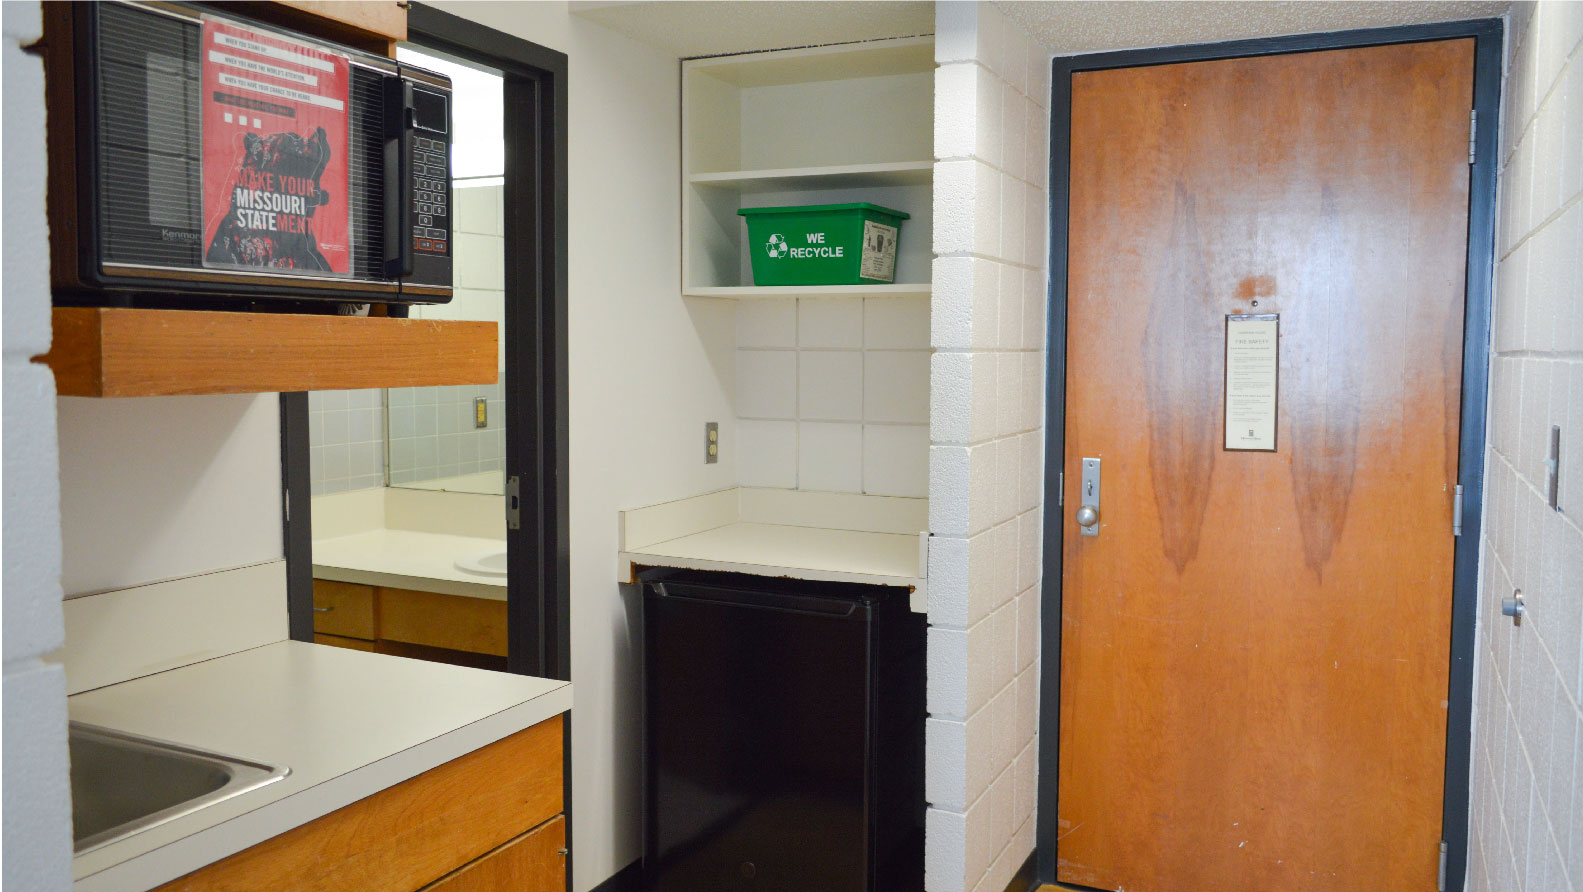 2-person En-suite Kitchenette with sink microwave mini fridge and cabinets next to bathroom